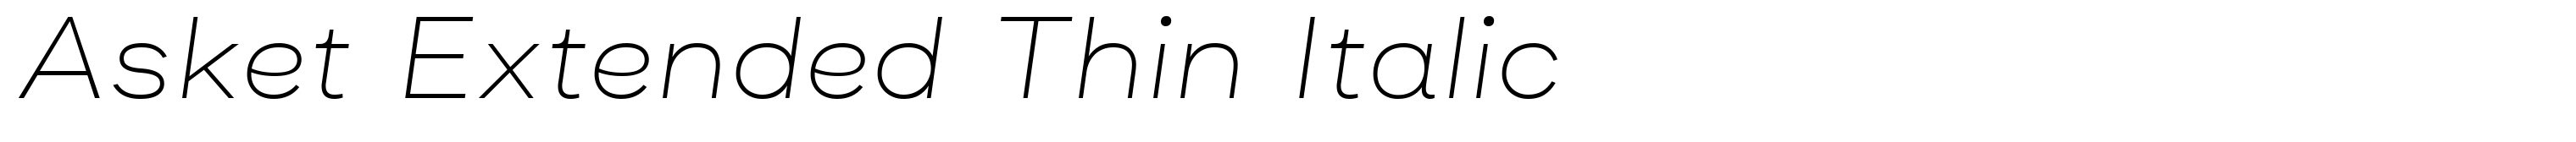 Asket Extended Thin Italic